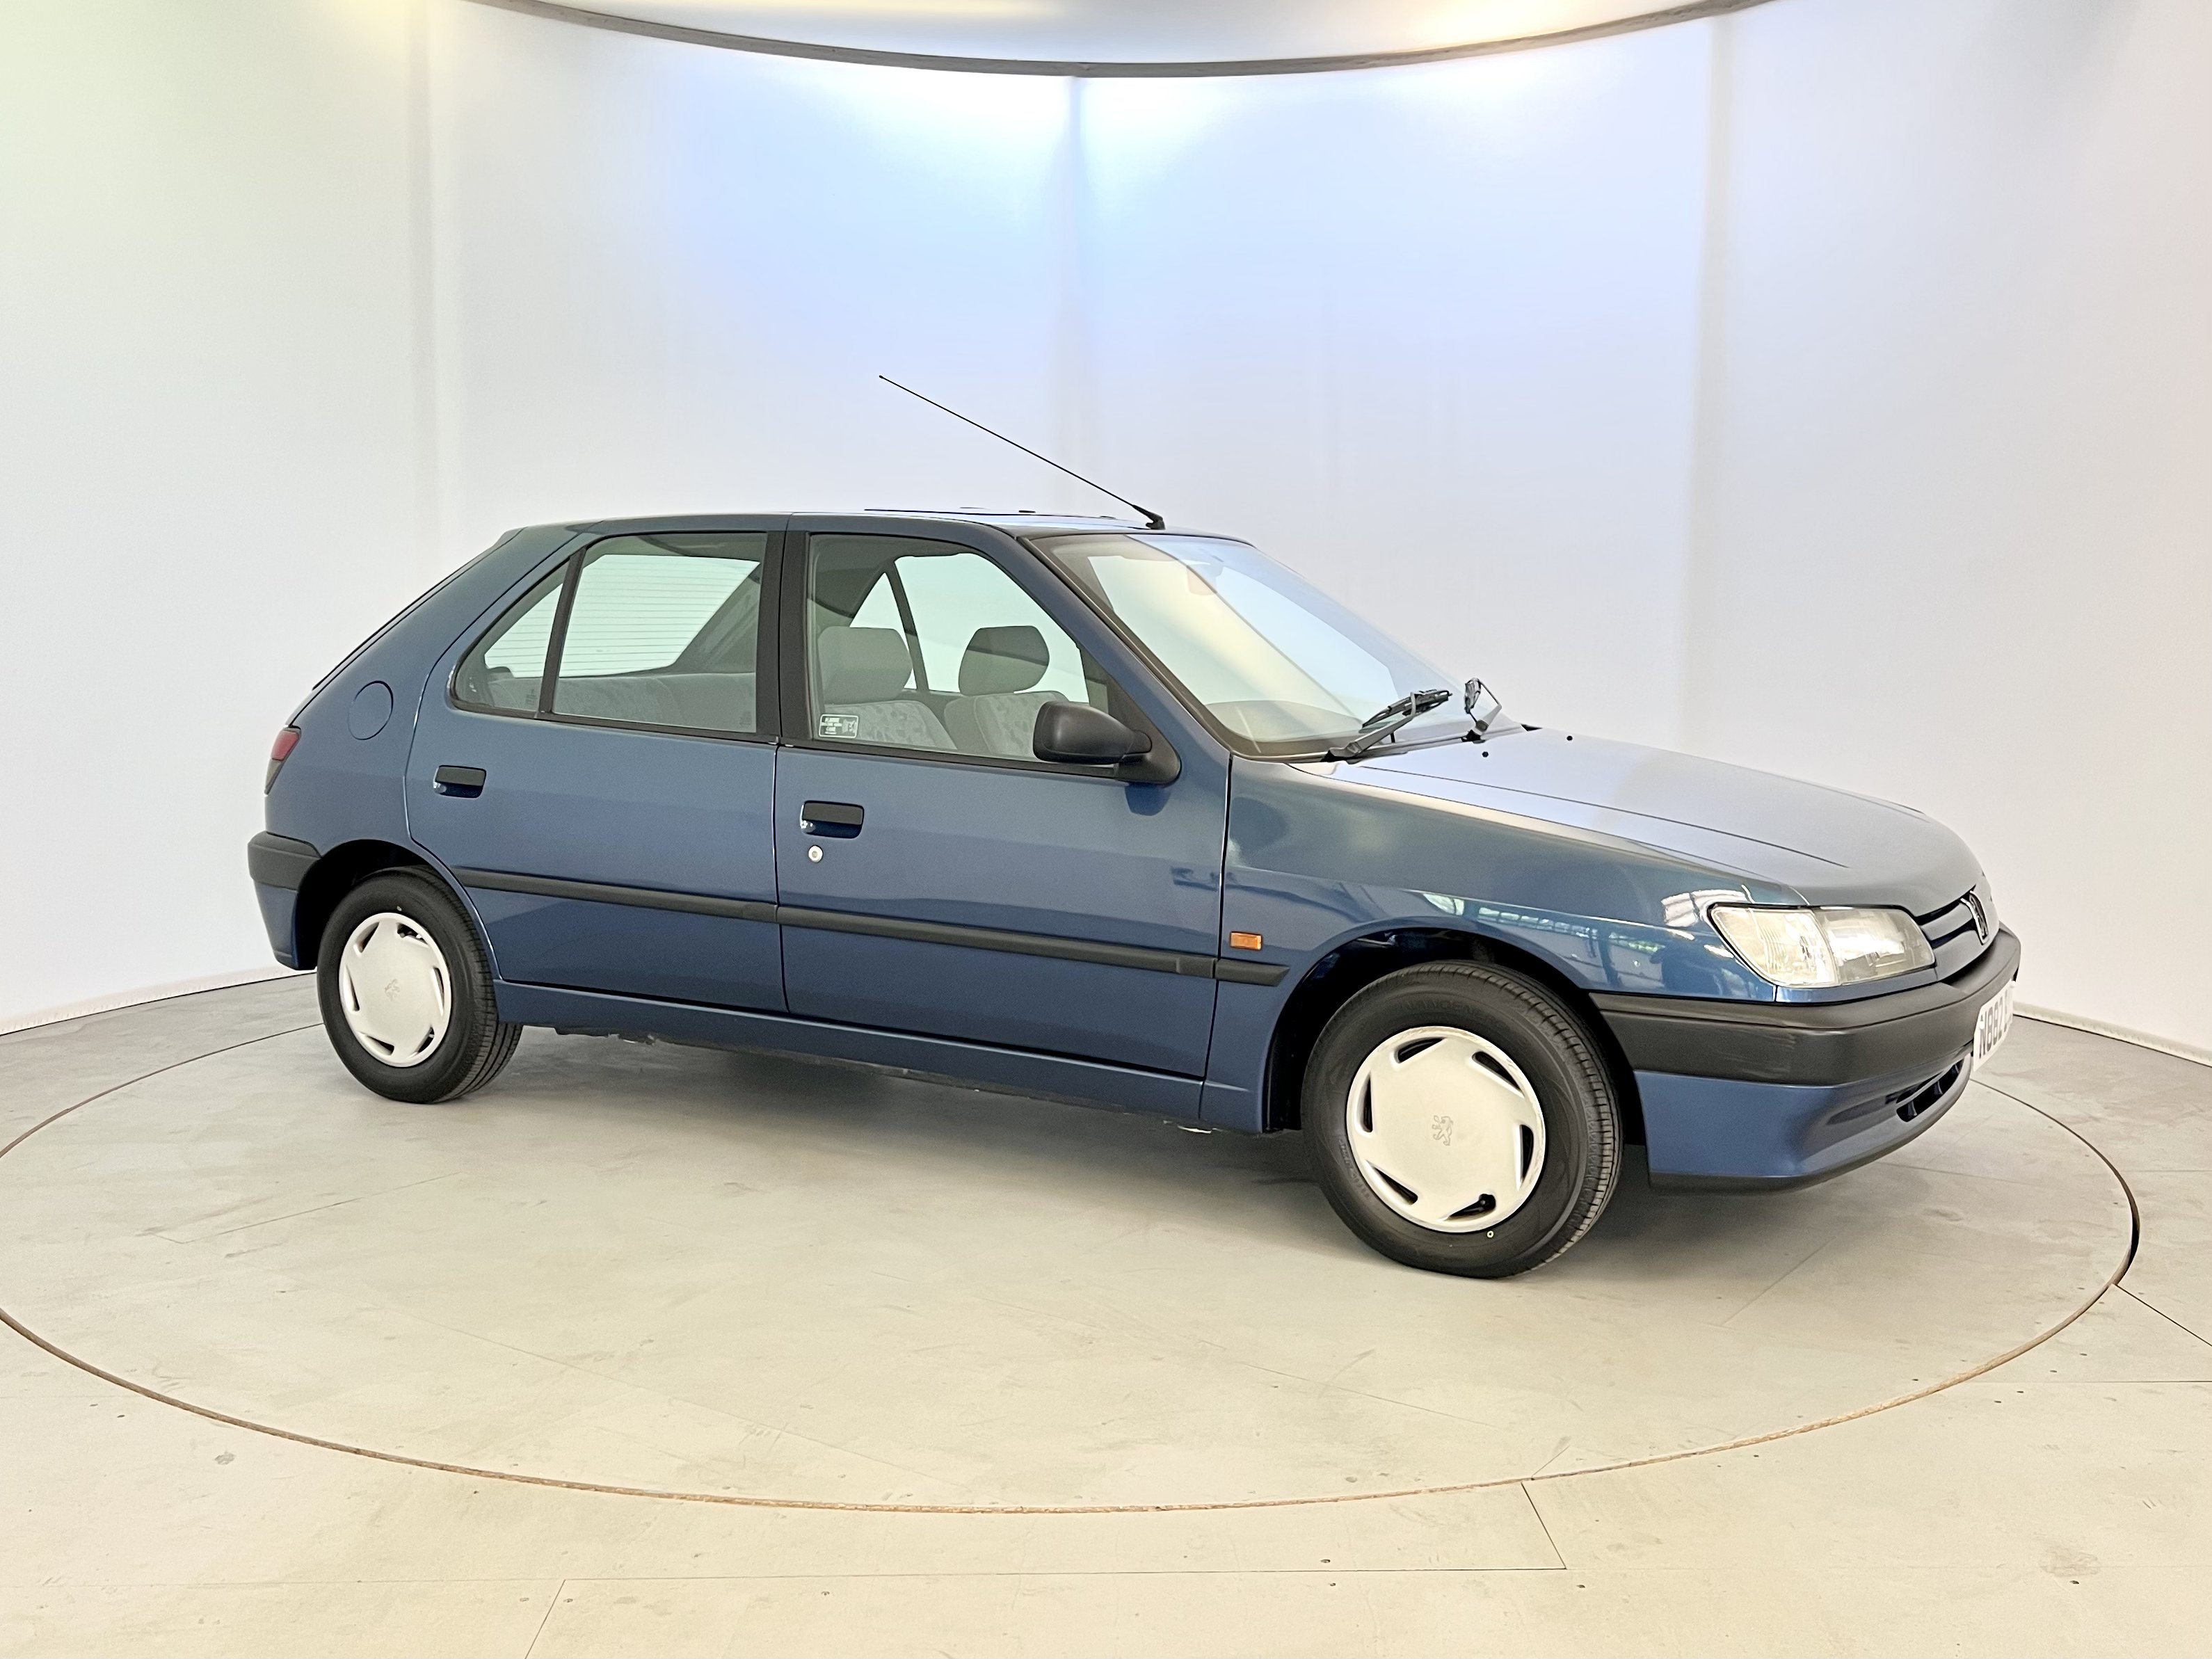 Peugeot 306 - Image 12 of 36